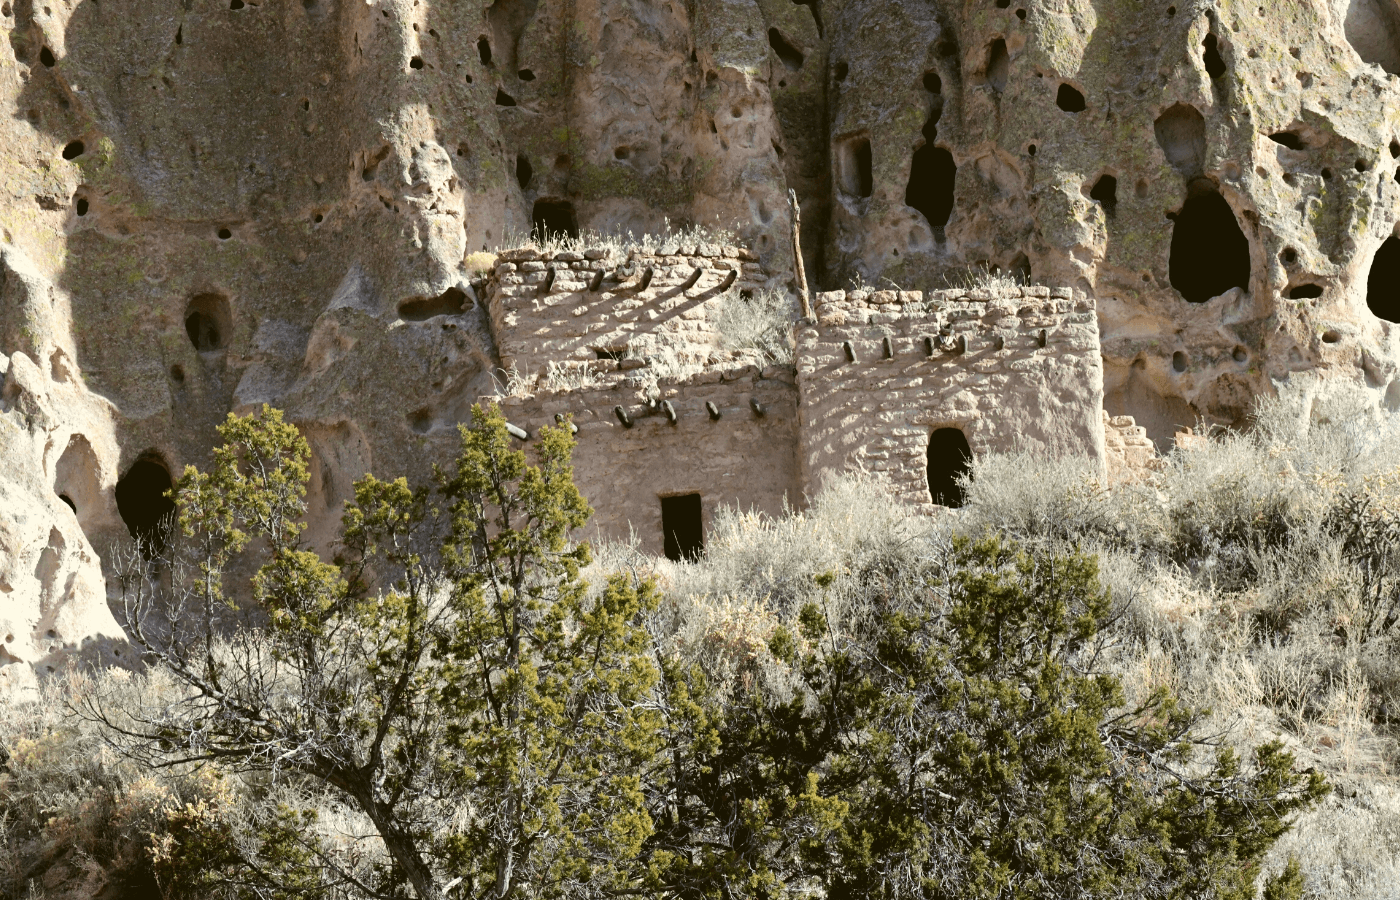 Ancient cave dwellings at Bandelier National Monument.